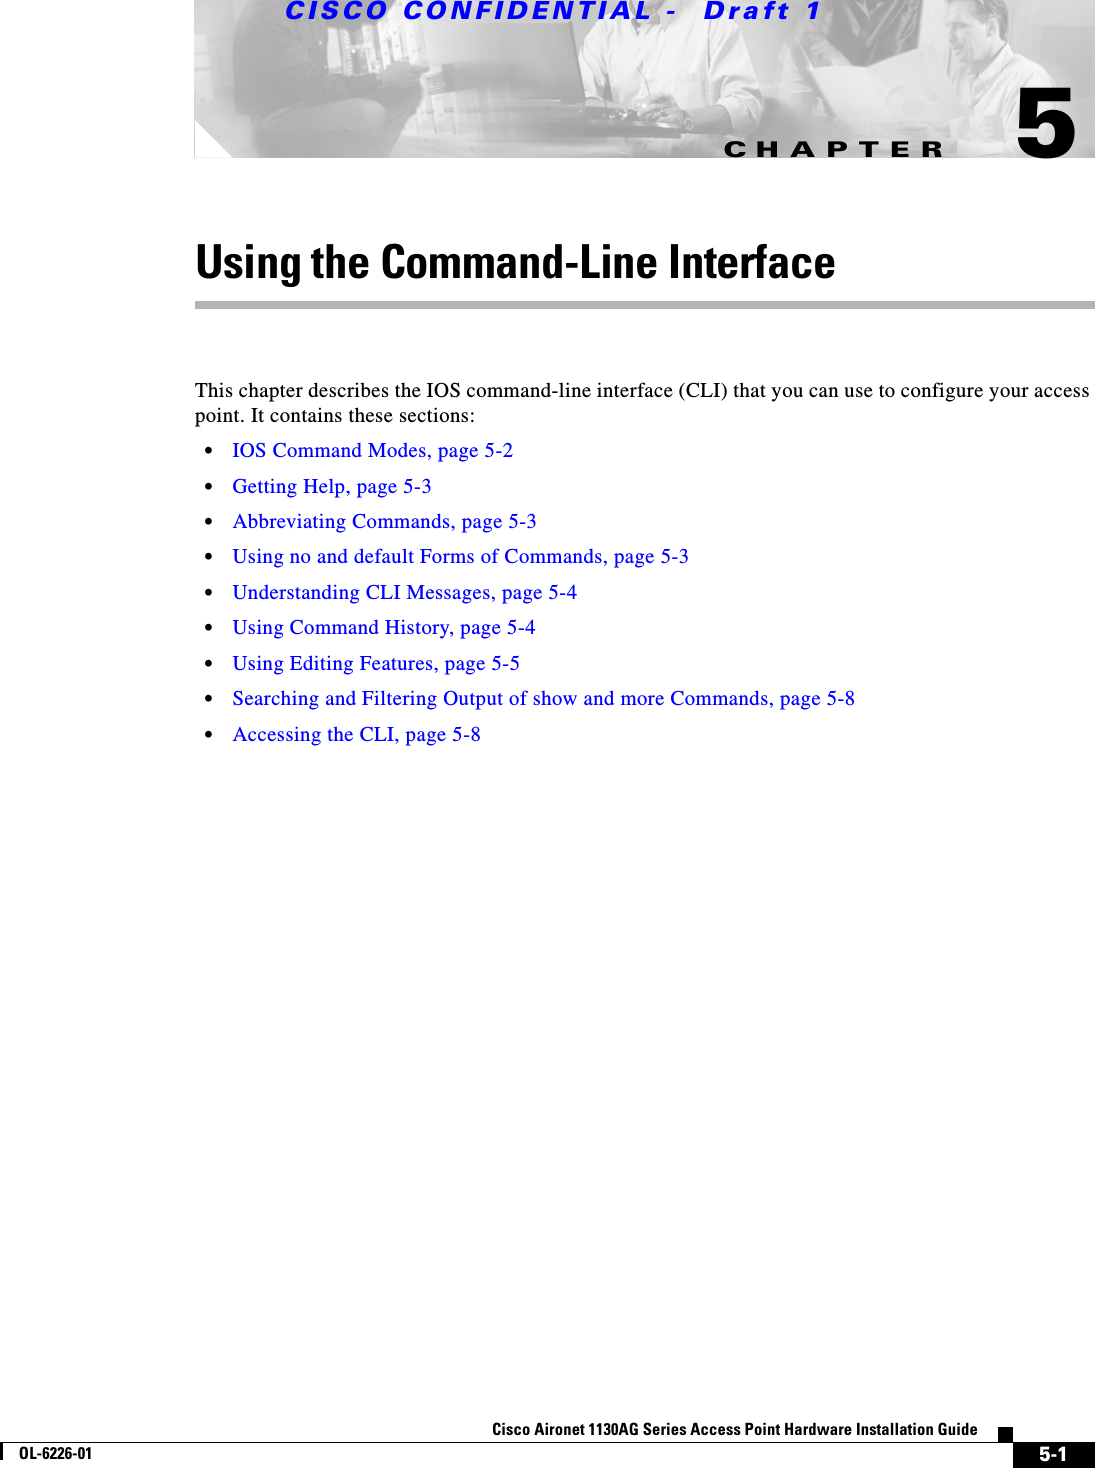 CHAPTER CISCO CONFIDENTIAL -  Draft 15-1Cisco Aironet 1130AG Series Access Point Hardware Installation GuideOL-6226-015Using the Command-Line InterfaceThis chapter describes the IOS command-line interface (CLI) that you can use to configure your access point. It contains these sections:•IOS Command Modes, page 5-2•Getting Help, page 5-3•Abbreviating Commands, page 5-3•Using no and default Forms of Commands, page 5-3•Understanding CLI Messages, page 5-4•Using Command History, page 5-4•Using Editing Features, page 5-5•Searching and Filtering Output of show and more Commands, page 5-8•Accessing the CLI, page 5-8